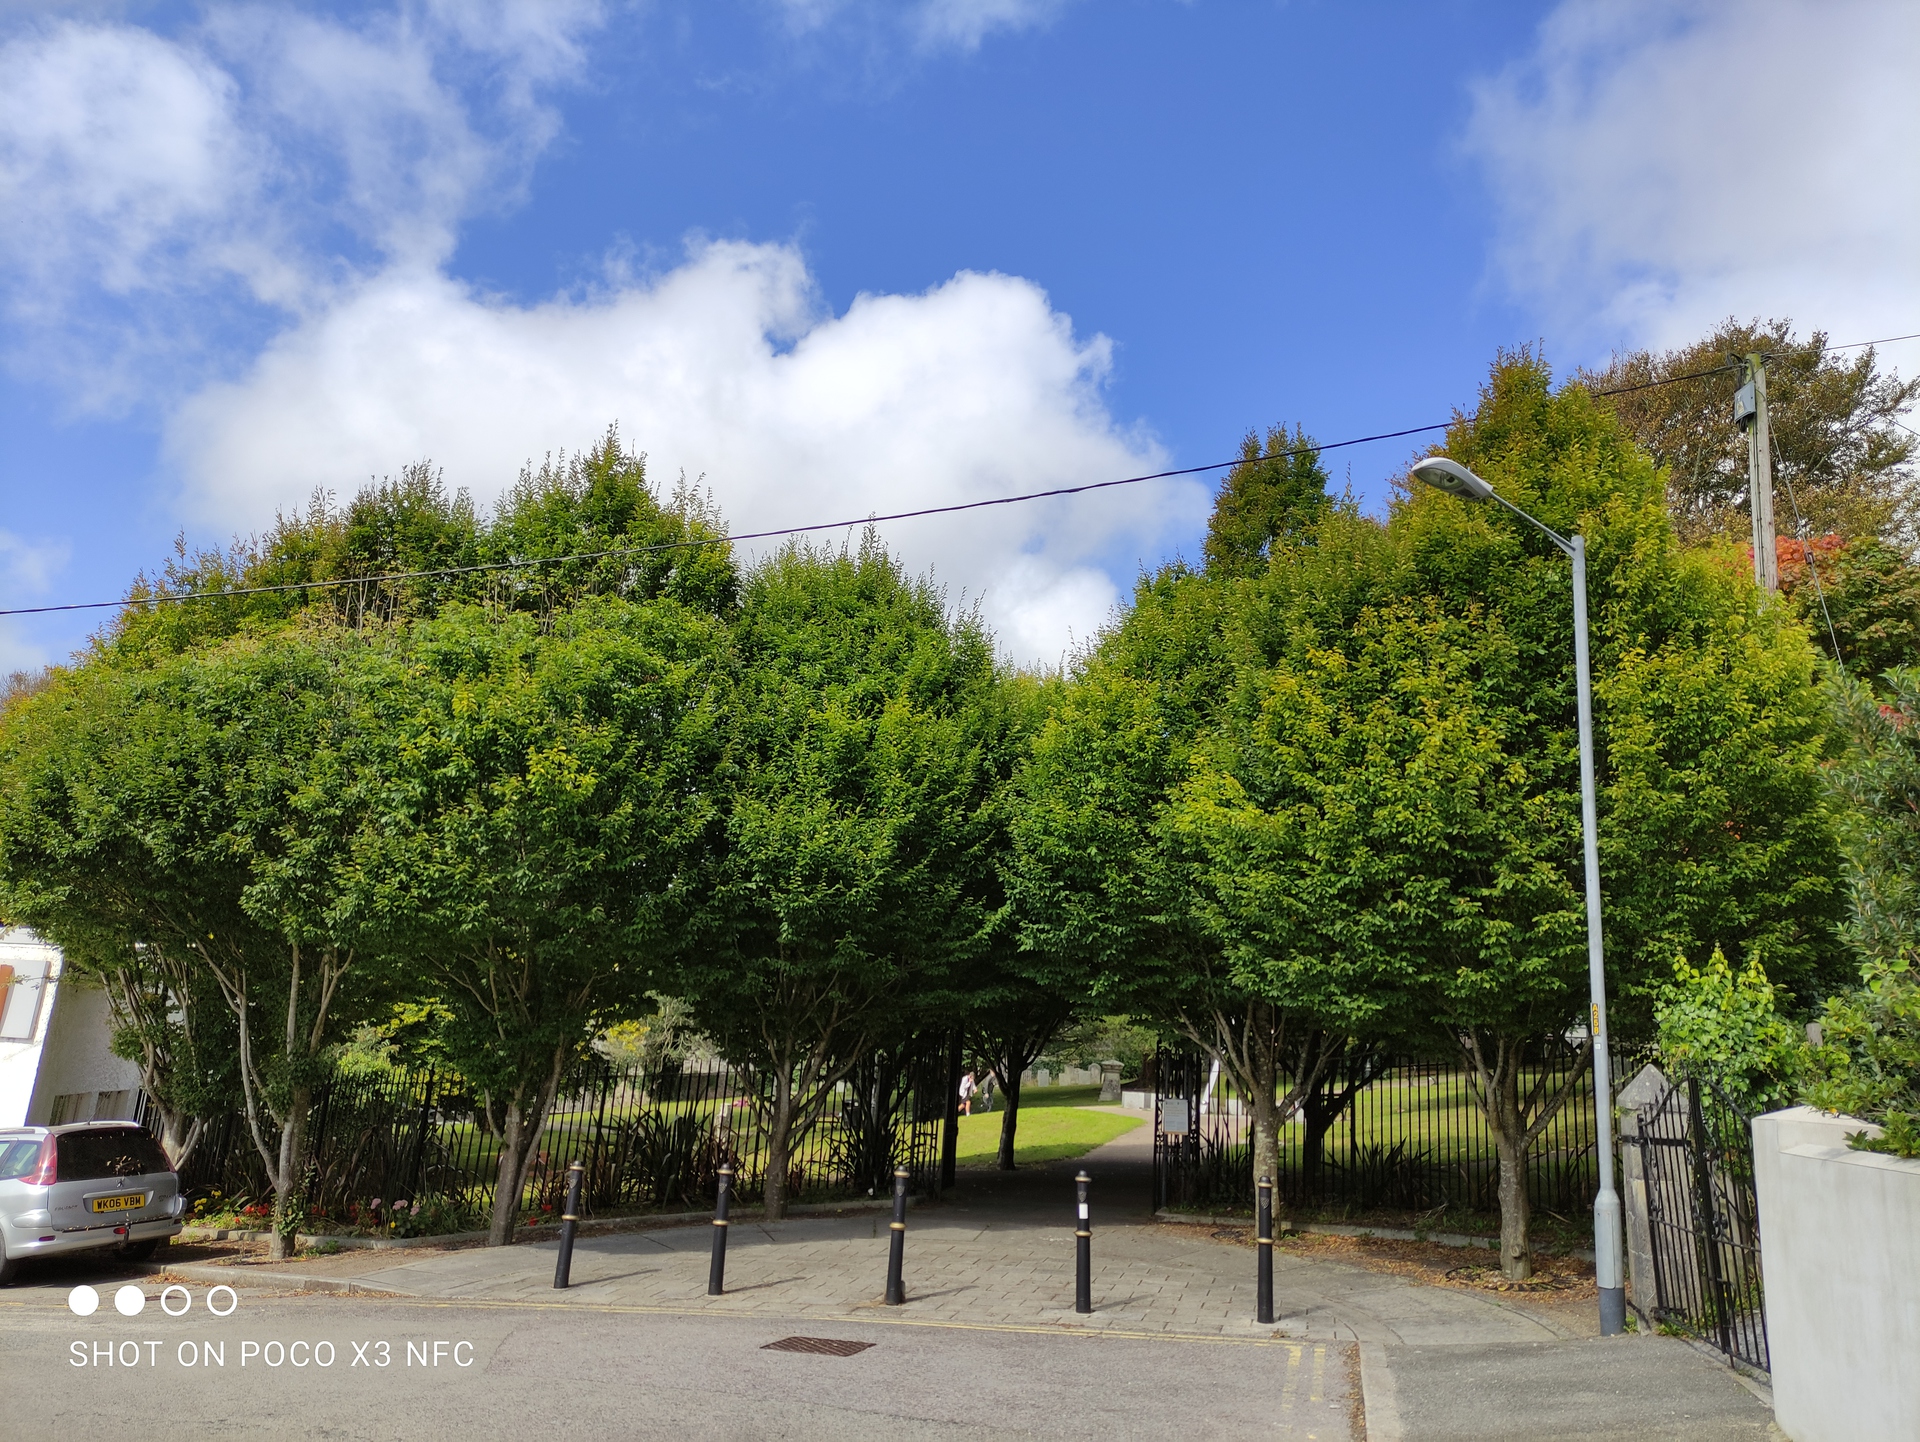 Xiaomi POCO X3 NFC HDR test of some shaded trees and bright sky